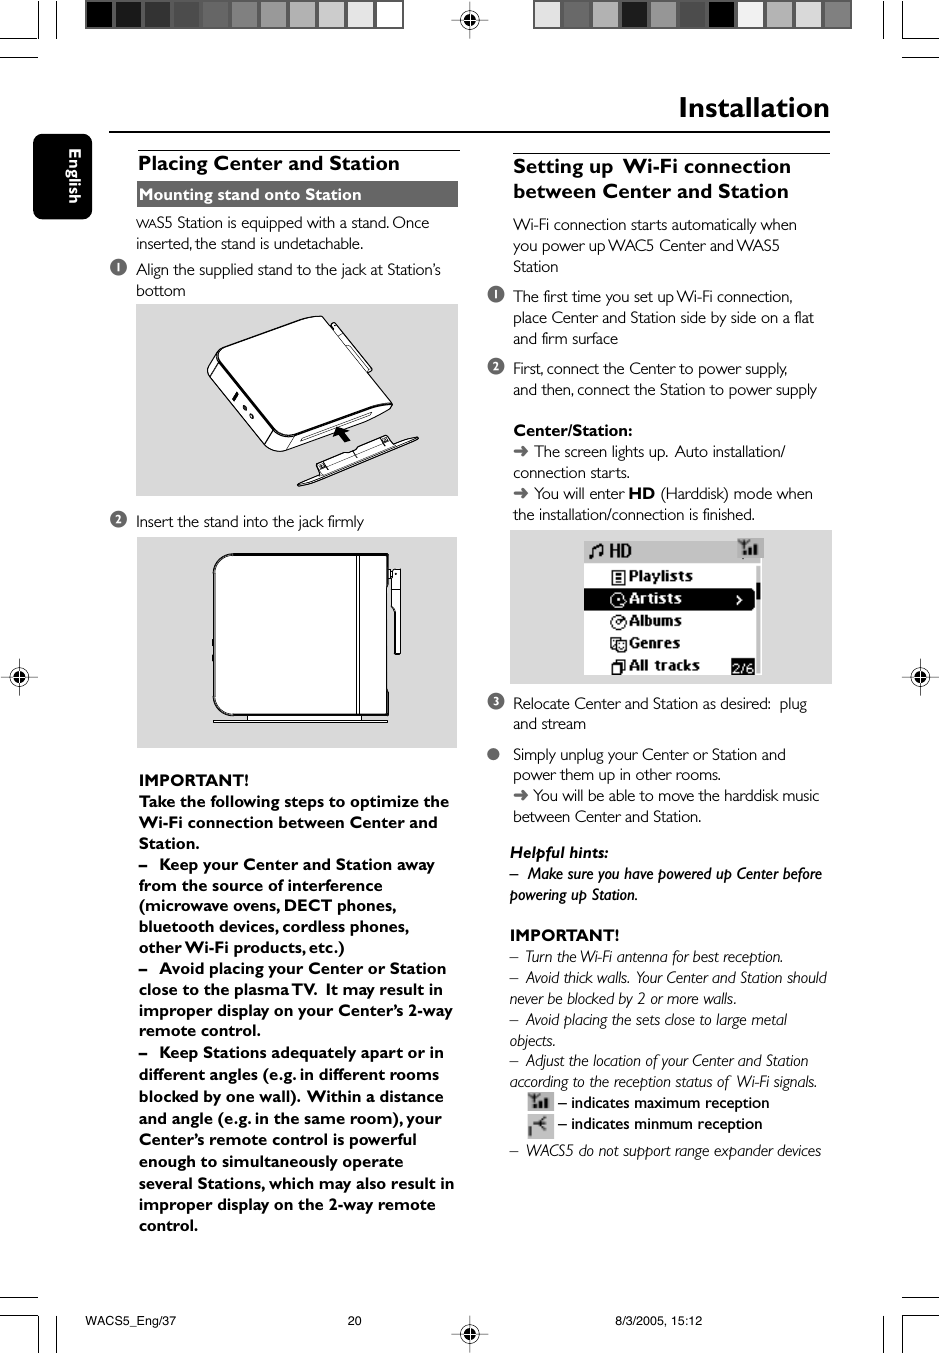 EnglishInstallationIMPORTANT!Take the following steps to optimize theWi-Fi connection between Center andStation.–Keep your Center and Station awayfrom the source of interference(microwave ovens, DECT phones,bluetooth devices, cordless phones,other Wi-Fi products, etc.)–Avoid placing your Center or Stationclose to the plasma TV.  It may result inimproper display on your Center’s 2-wayremote control.–Keep Stations adequately apart or indifferent angles (e.g. in different roomsblocked by one wall).  Within a distanceand angle (e.g. in the same room), yourCenter’s remote control is powerfulenough to simultaneously operateseveral Stations, which may also result inimproper display on the 2-way remotecontrol.Placing Center and Station Setting up  Wi-Fi connectionbetween Center and StationWi-Fi connection starts automatically whenyou power up WAC5 Center and WAS5Station1The first time you set up Wi-Fi connection,place Center and Station side by side on a flatand firm surface2First, connect the Center to power supply,and then, connect the Station to power supplyCenter/Station:➜The screen lights up.  Auto installation/connection starts.➜You will enter HD (Harddisk) mode whenthe installation/connection is finished.3Relocate Center and Station as desired:  plugand stream●Simply unplug your Center or Station andpower them up in other rooms.➜ You will be able to move the harddisk musicbetween Center and Station.Helpful hints:–Make sure you have powered up Center beforepowering up Station.IMPORTANT!–  Turn the Wi-Fi antenna for best reception.–  Avoid thick walls.  Your Center and Station shouldnever be blocked by 2 or more walls.–  Avoid placing the sets close to large metalobjects.–  Adjust the location of your Center and Stationaccording to the reception status of  Wi-Fi signals.– indicates maximum reception– indicates minmum reception–  WACS5 do not support range expander devicesMounting stand onto StationWAS5 Station is equipped with a stand. Onceinserted, the stand is undetachable.1Align the supplied stand to the jack at Station’sbottom2Insert the stand into the jack firmlyWACS5_Eng/37 8/3/2005, 15:1220